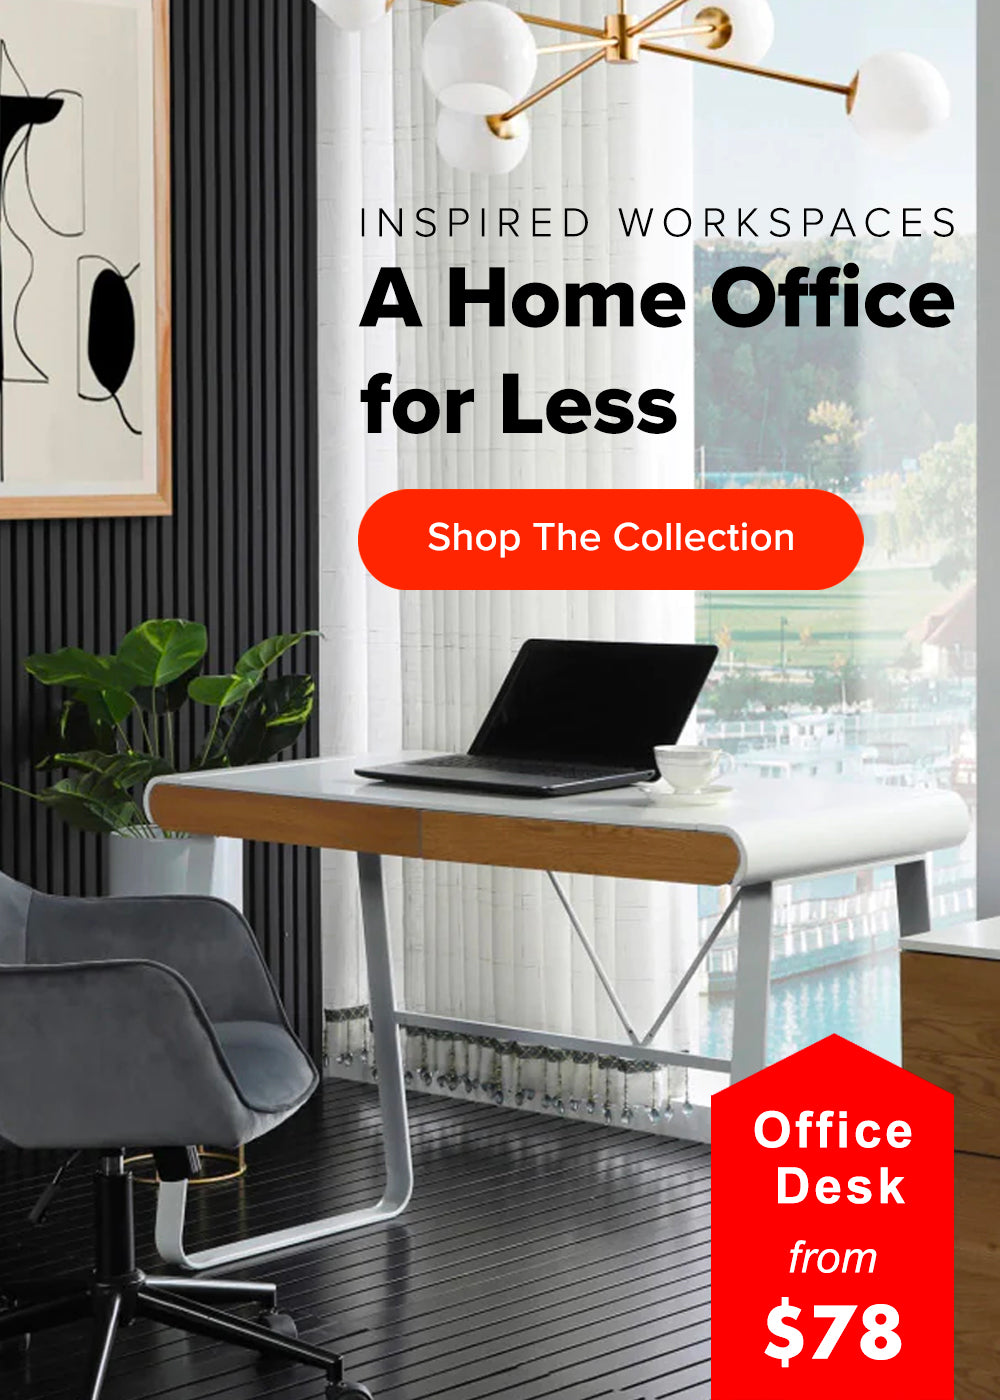 Inspired Workspaces - A Home Office for Less